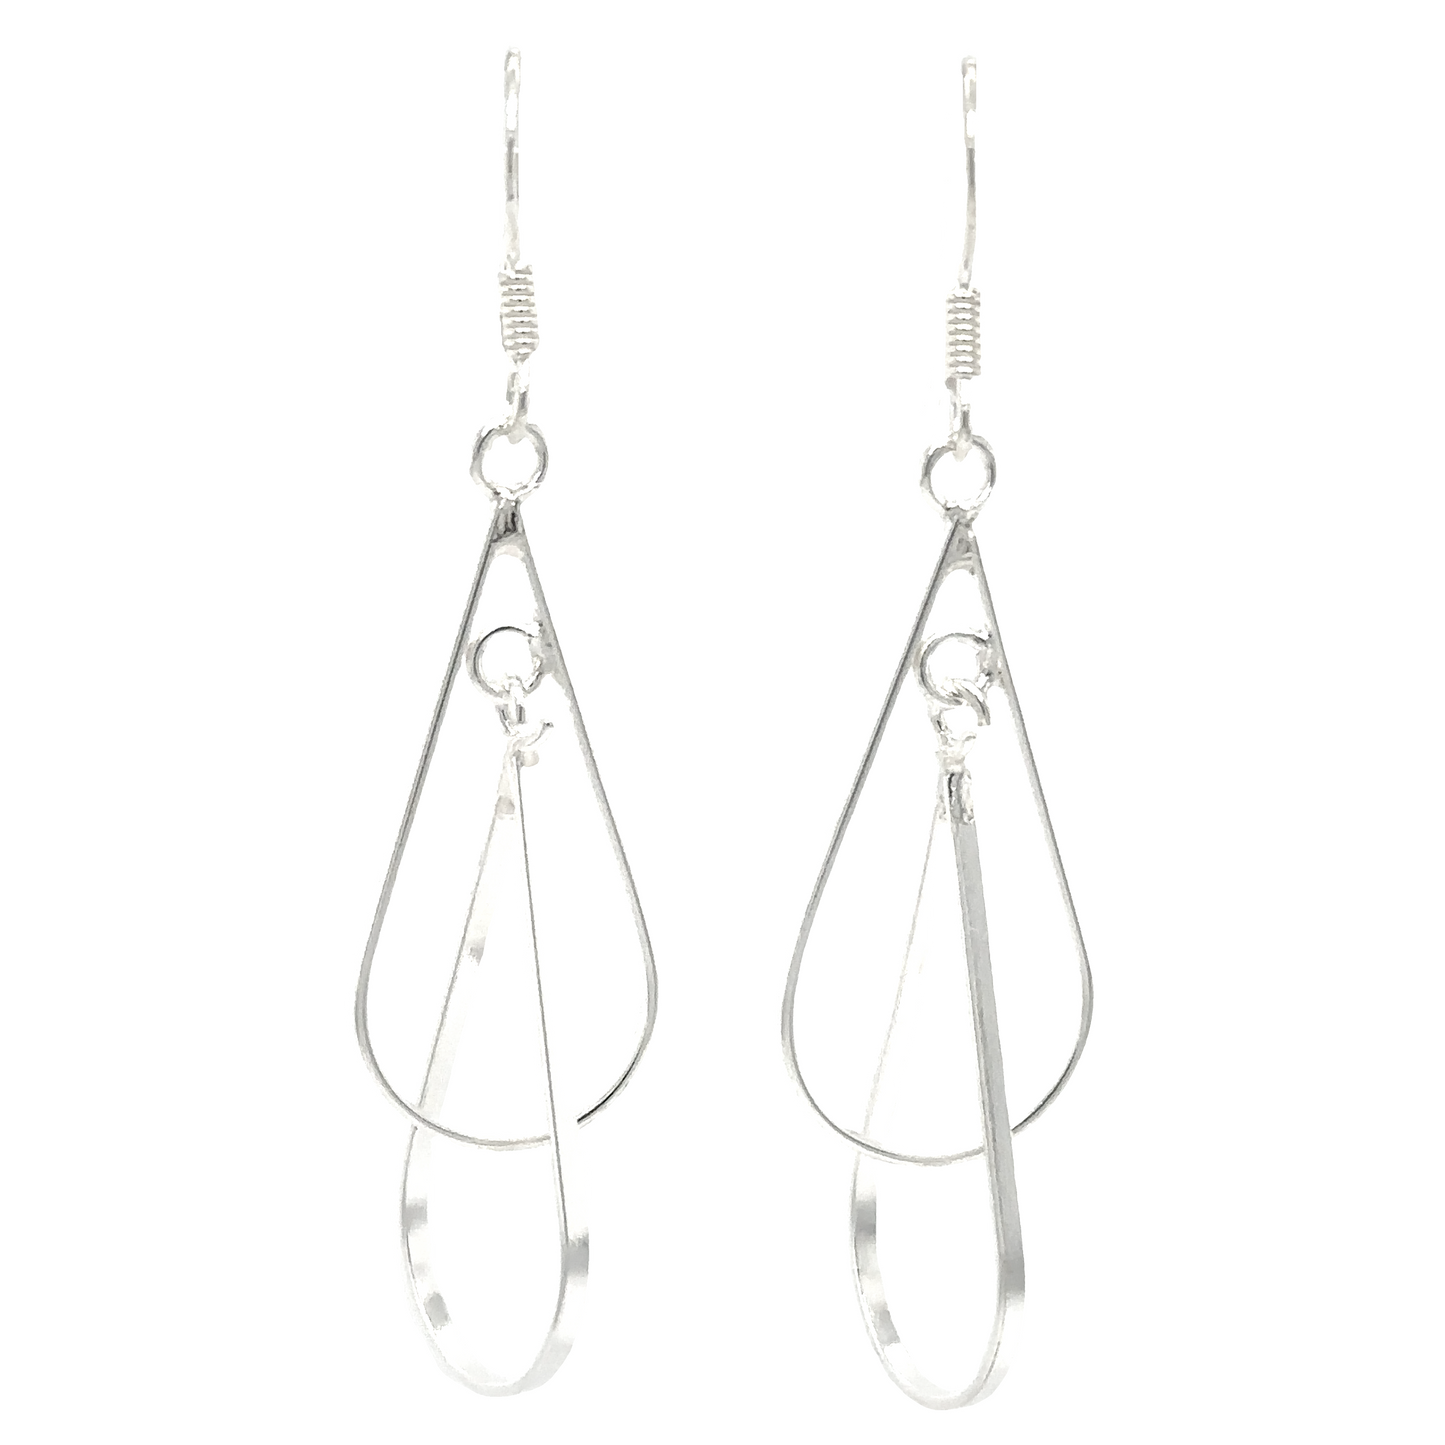 A pair of Super Silver Double Wire Teardrop Earrings, which are lightweight and have a modern teardrop shape.